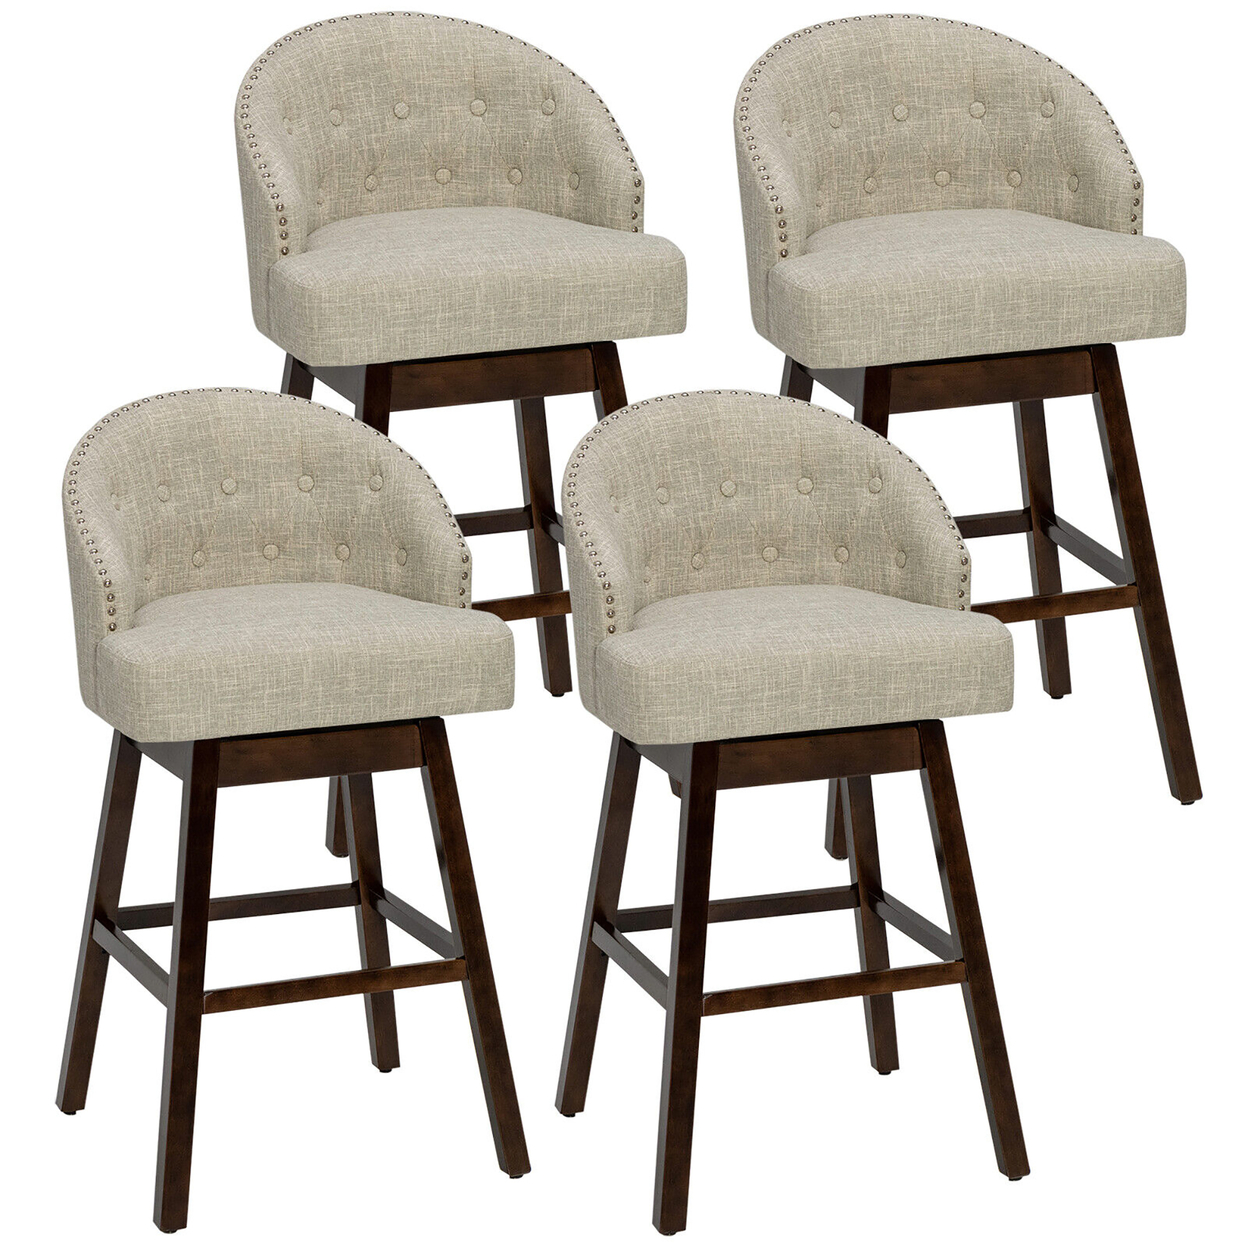 Set Of 4 Swivel Bar Stools Tufted Bar Height Pub Chairs W/ Rubber Wood Legs